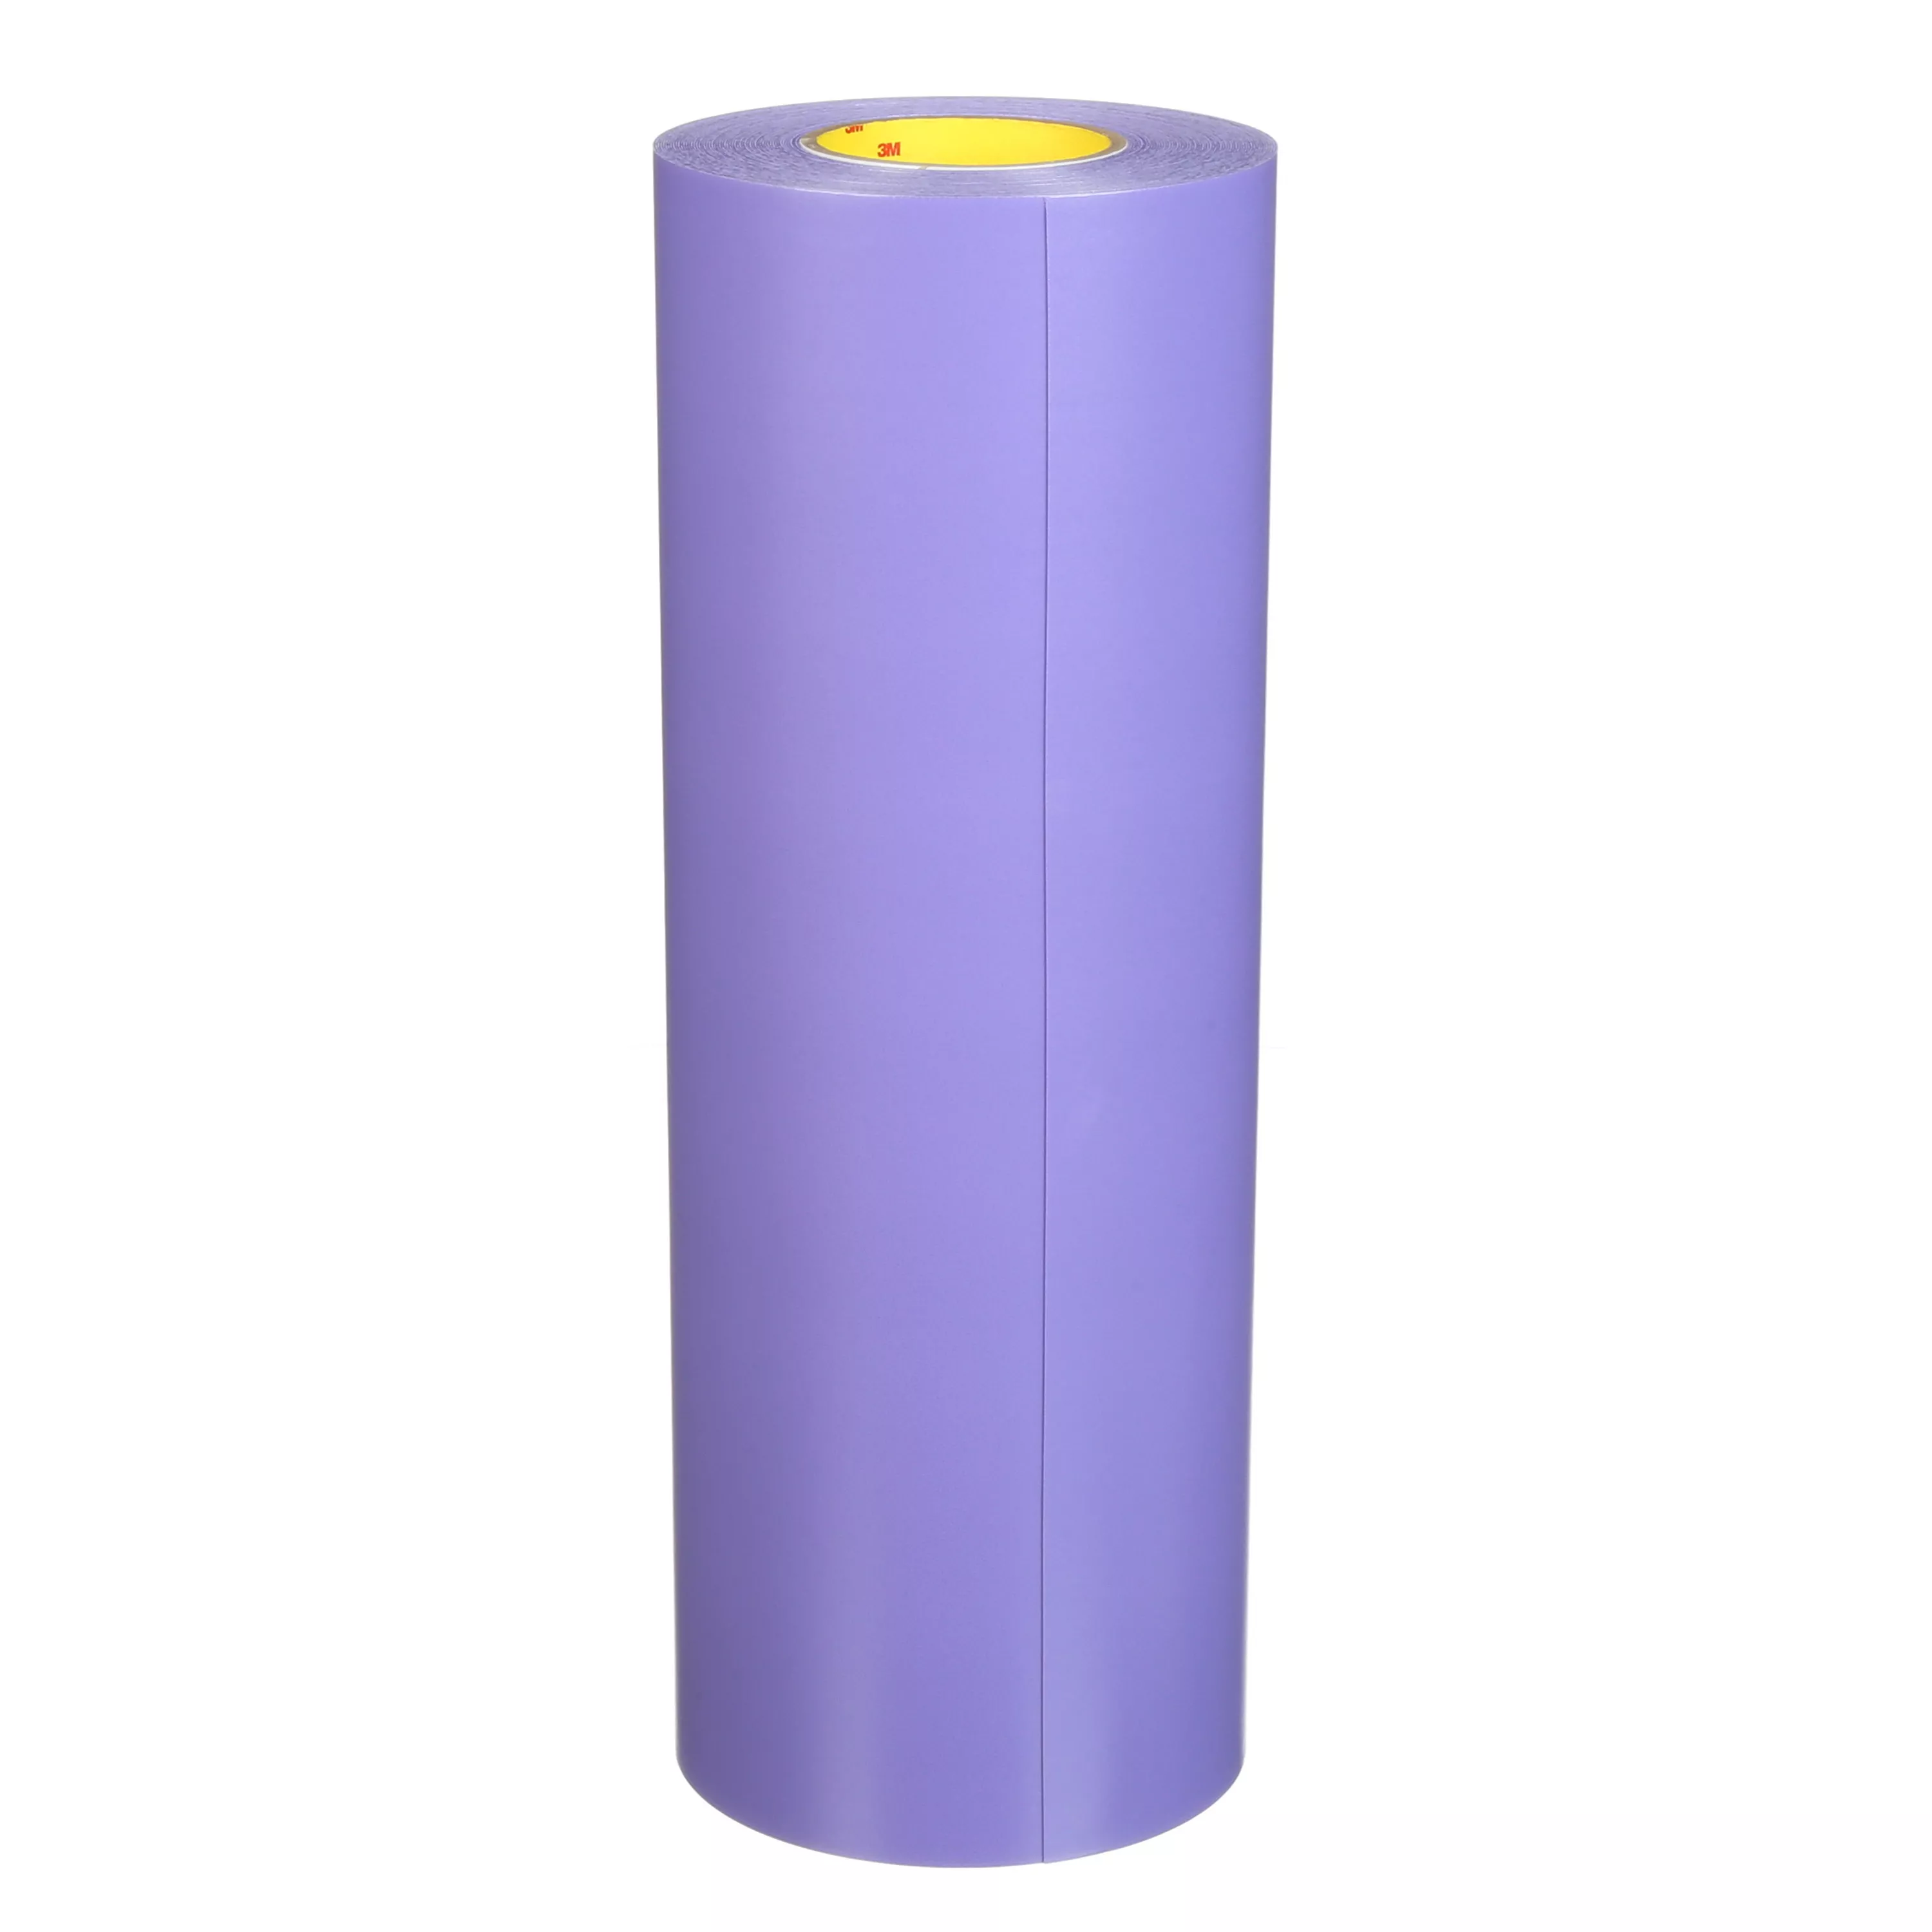 3M™ Cushion-Mount™ Plus Plate Mounting Tape E1515H, Purple, 54 in x
25
yd, 15 mil, 1 Roll/Case